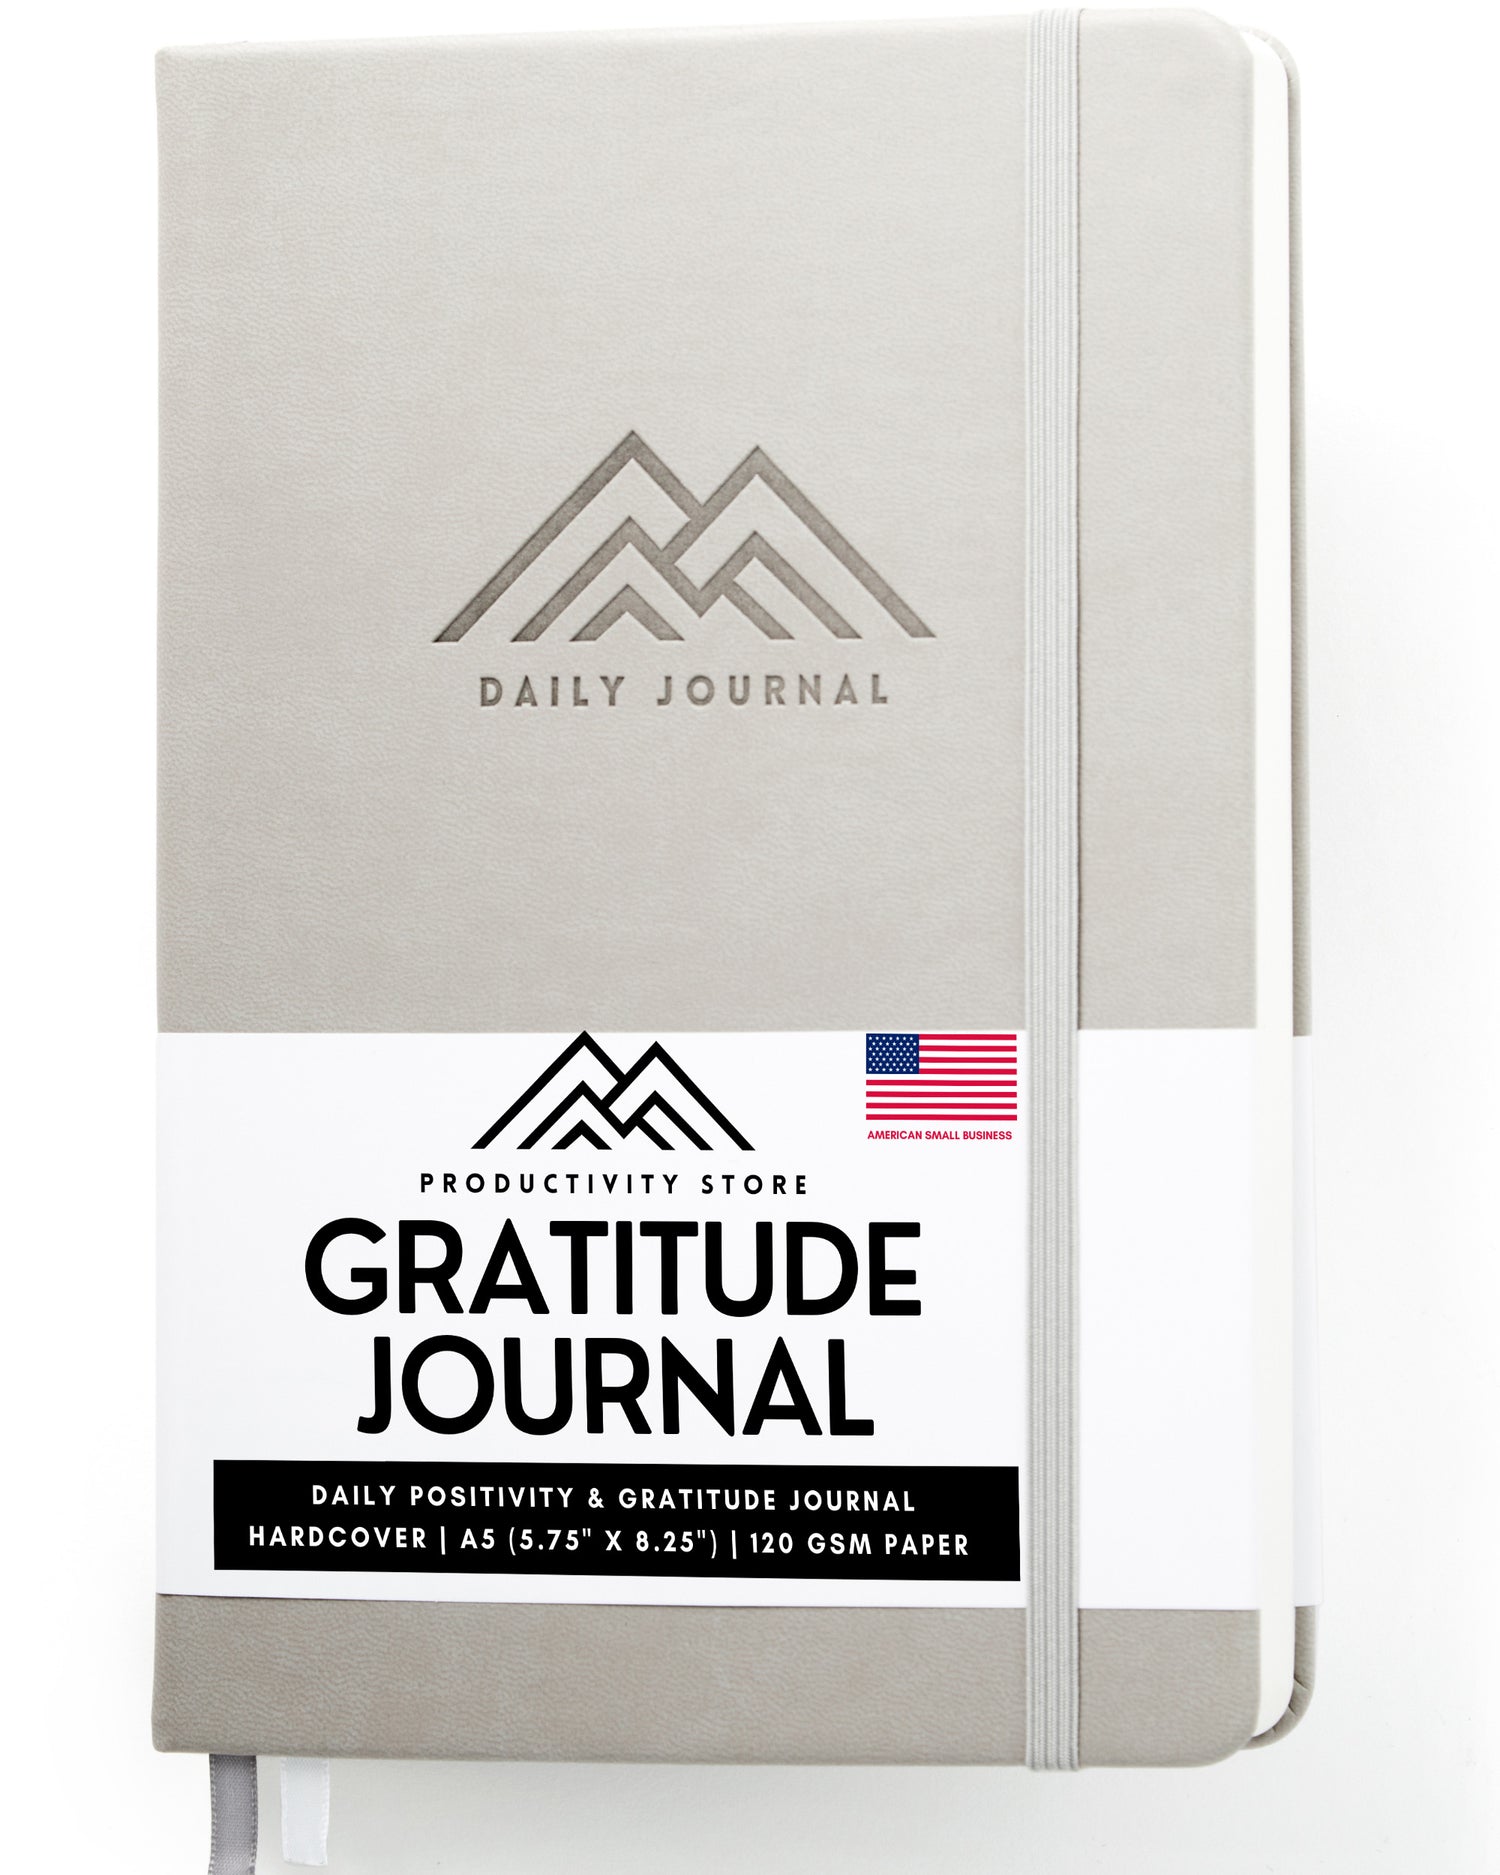 10 Inspiring Gratitude Journal Examples to Motivate Your Writing